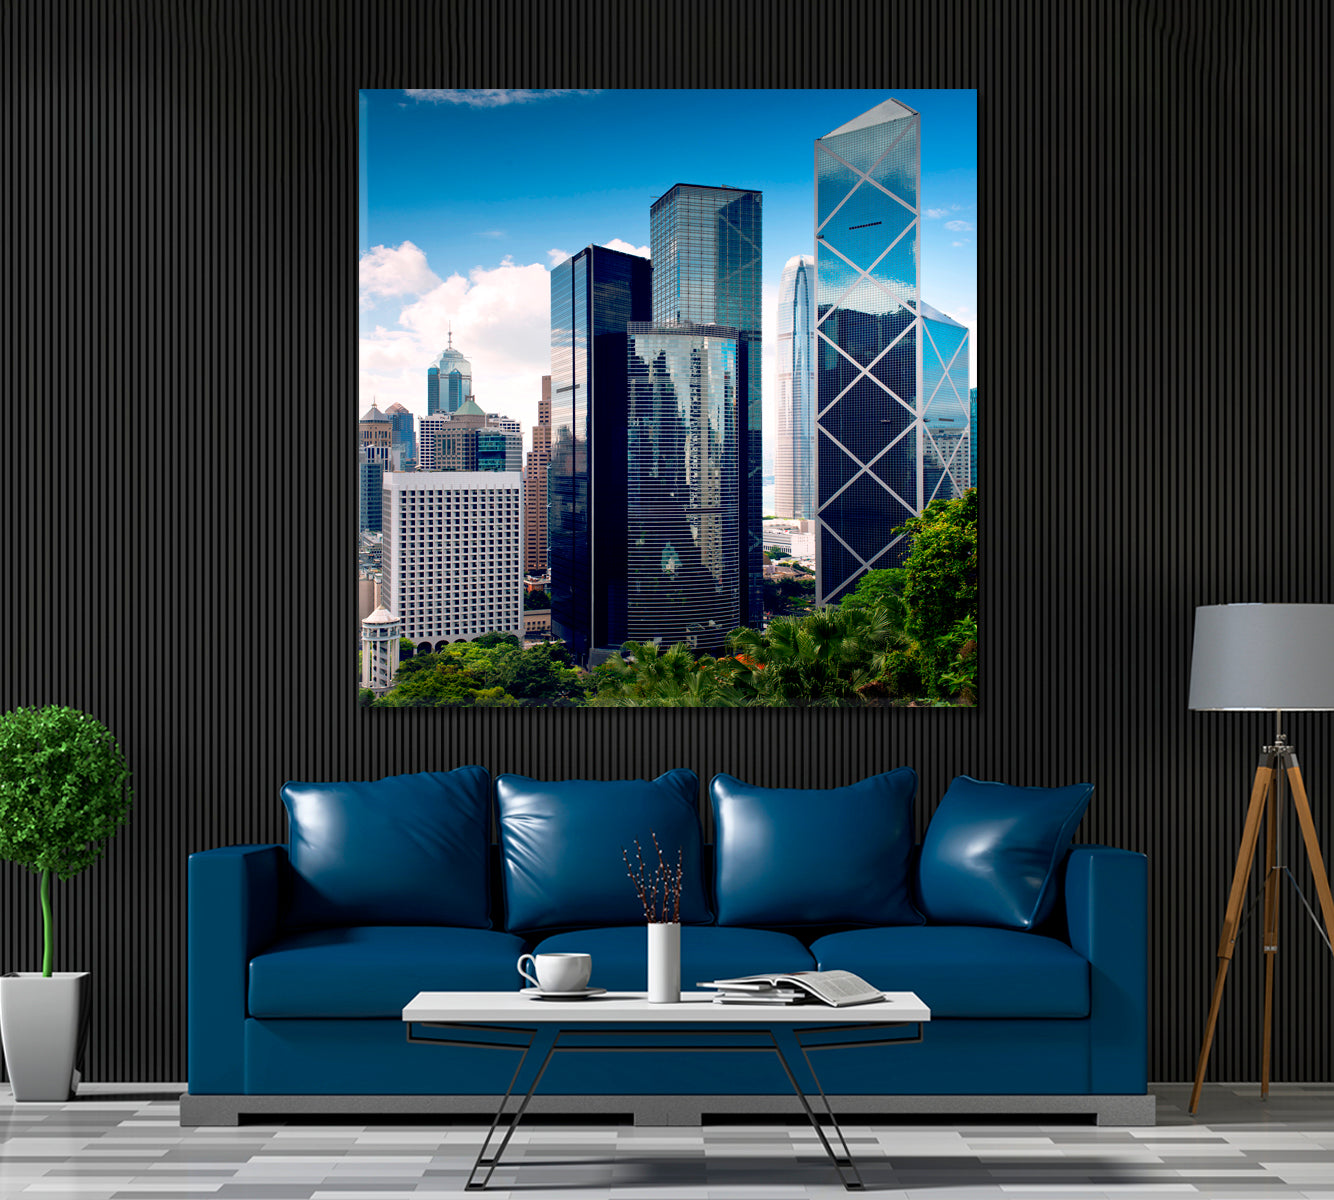 Hong Kong City Skyscrapers Canvas Print ArtLexy 1 Panel 12"x12" inches 